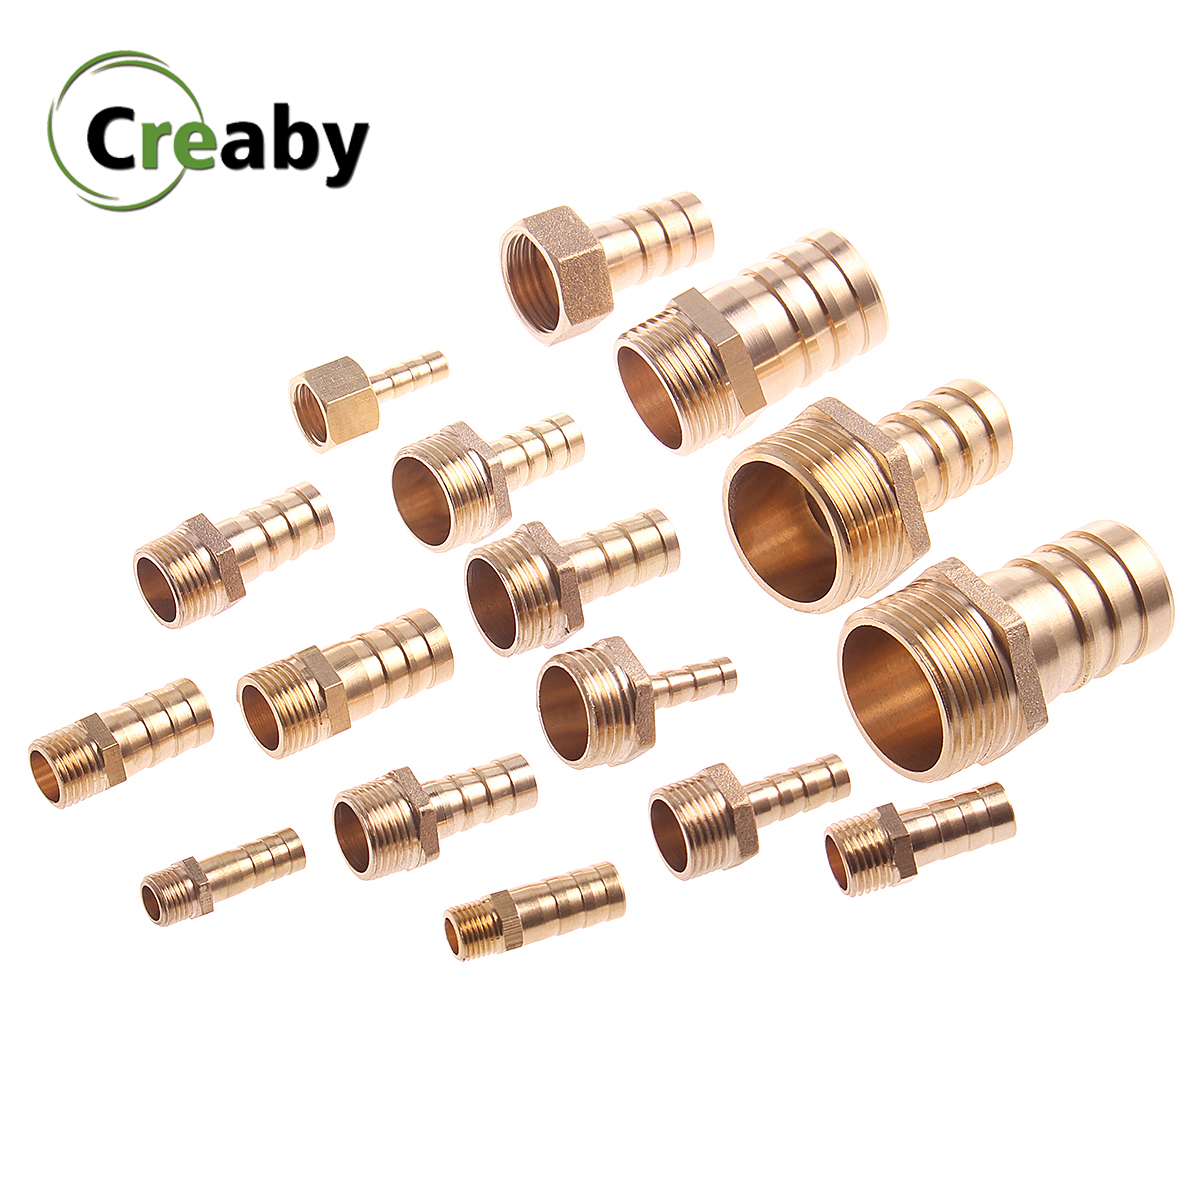 6mm-12mm Hose Barb Tail 1/4" 1/2" NPT Female Thread Connector Joint Pipe Fitting 